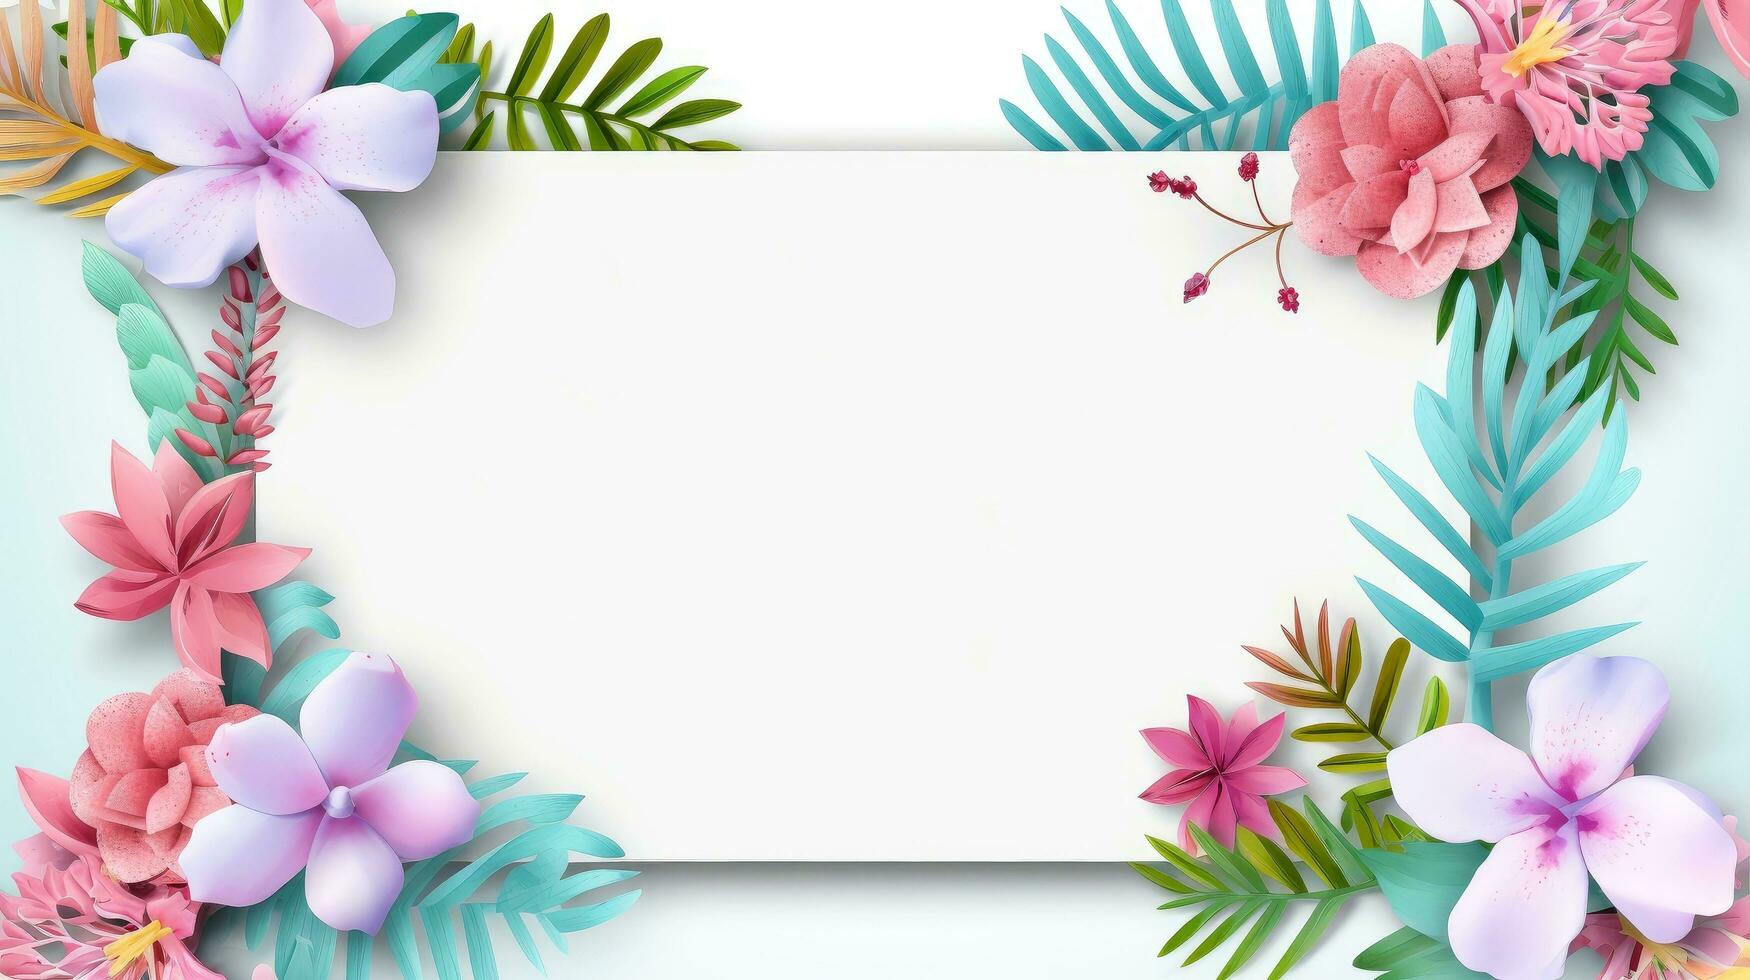 Page 2 - Free and customizable spring desktop wallpaper templates